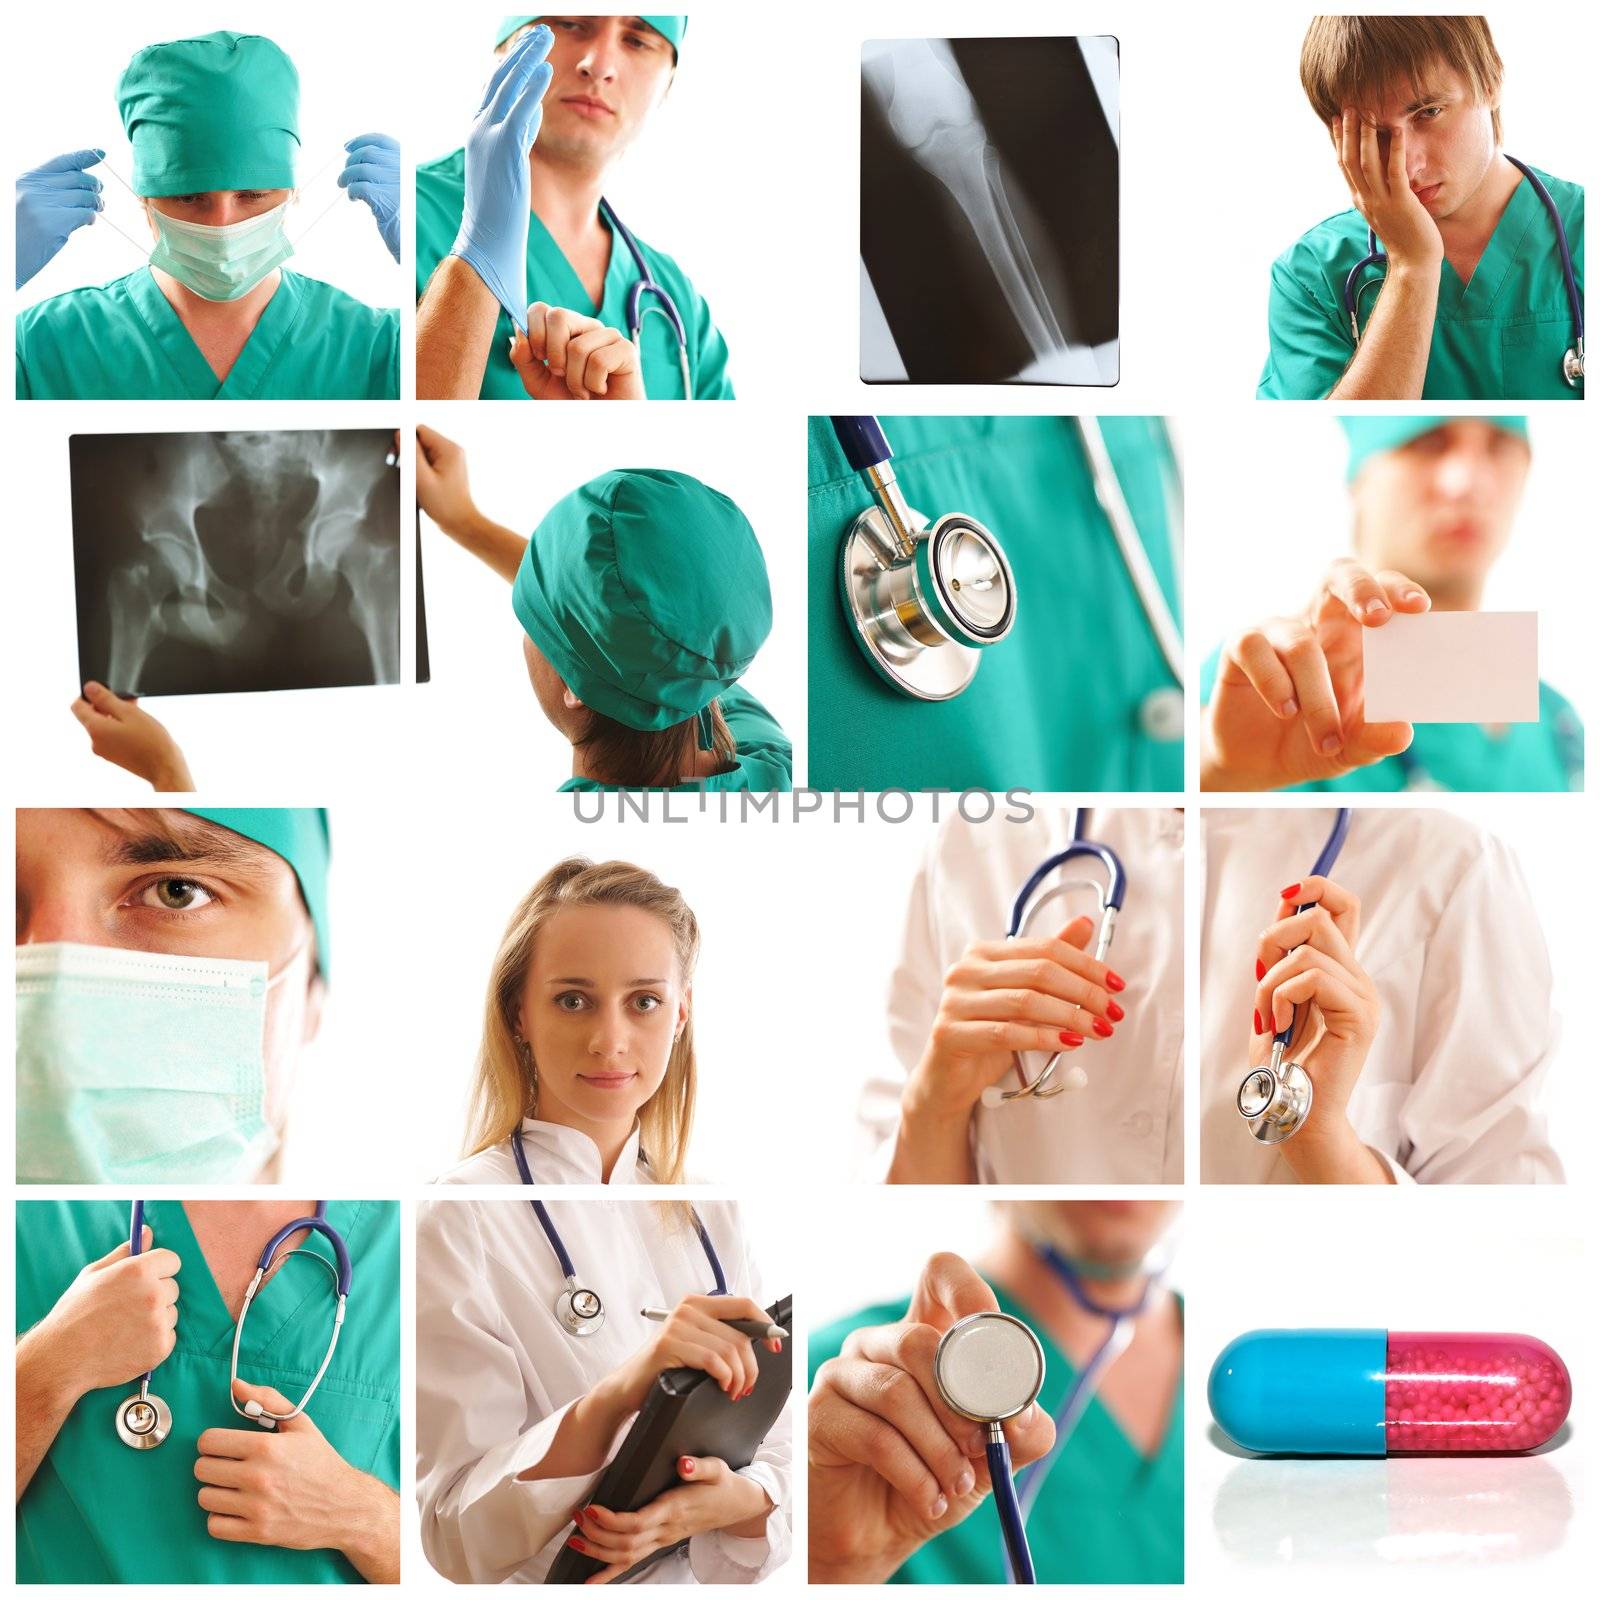 Medical collage by haveseen